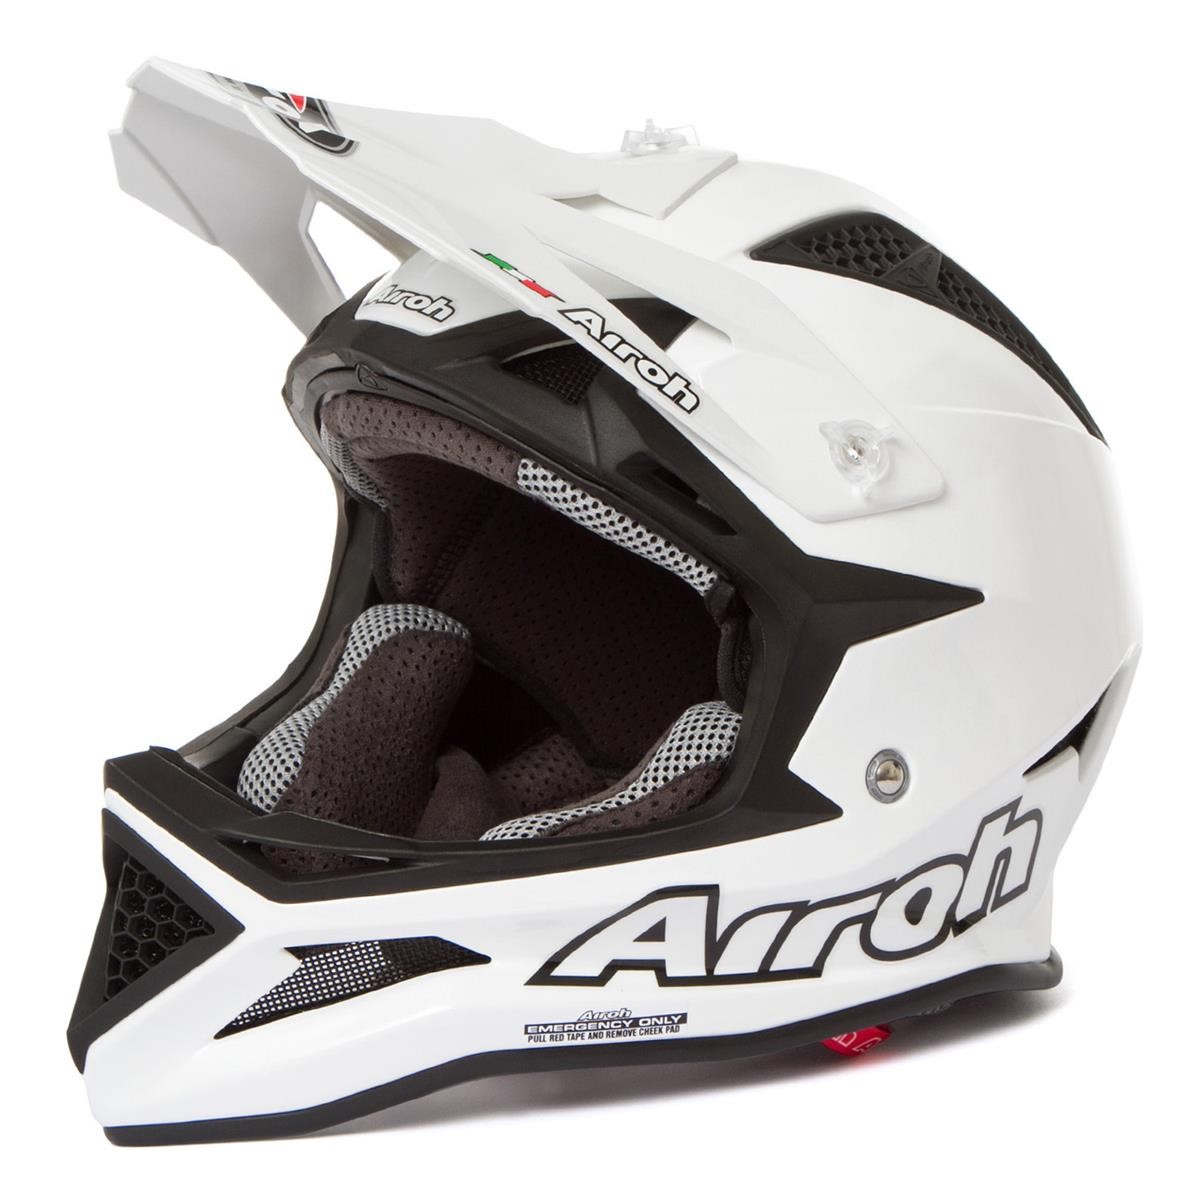 Airoh Casque VTT Downhill Fighters Color - Gloss White